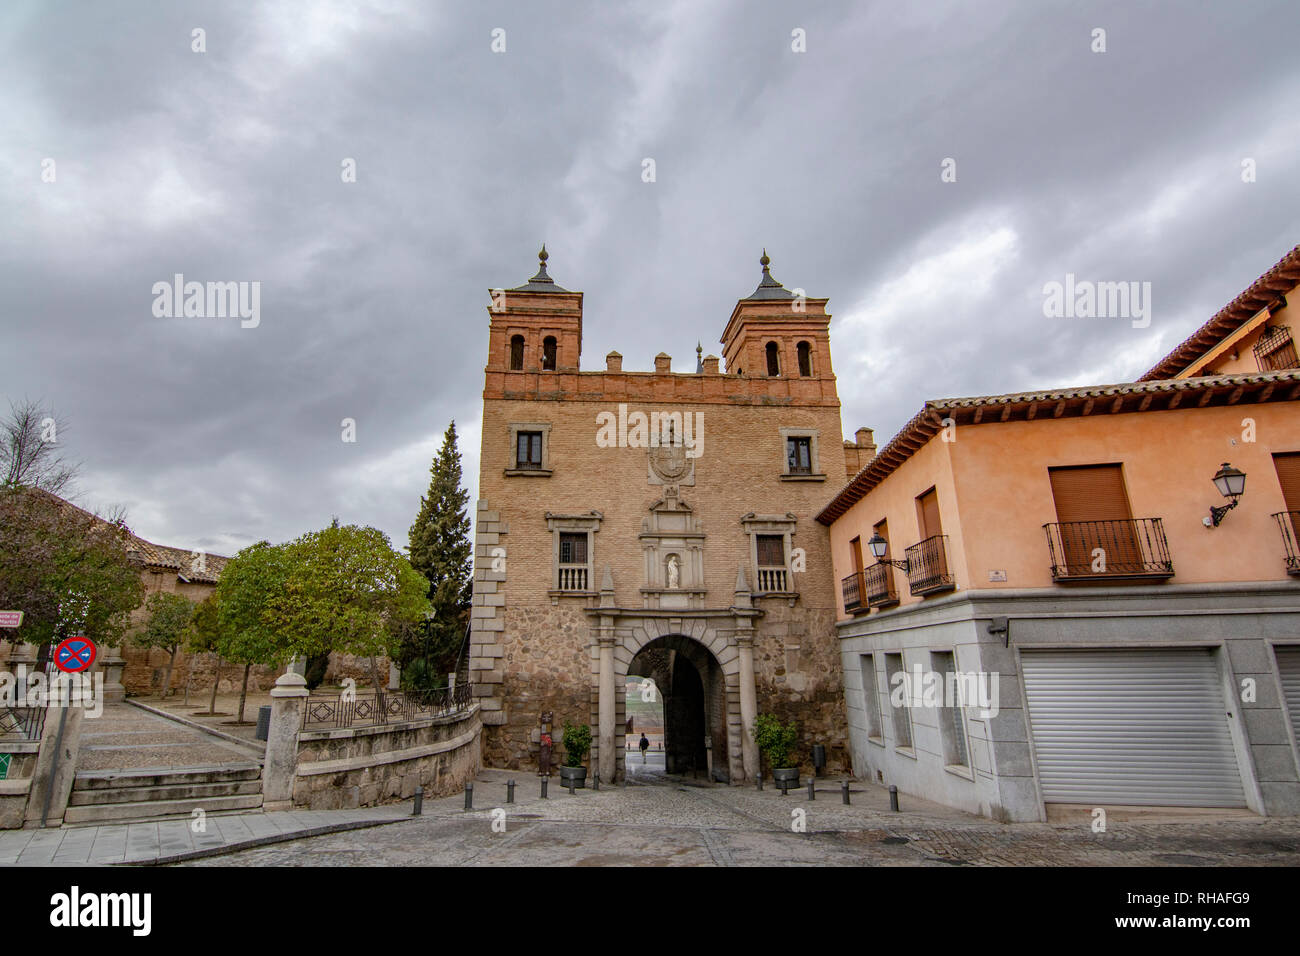 Toledo, Spain; February 2017: Puerta del CambrÃ³n is of Arabic origin and is one of the oldest entryways to the monumental city of Toledo Stock Photo